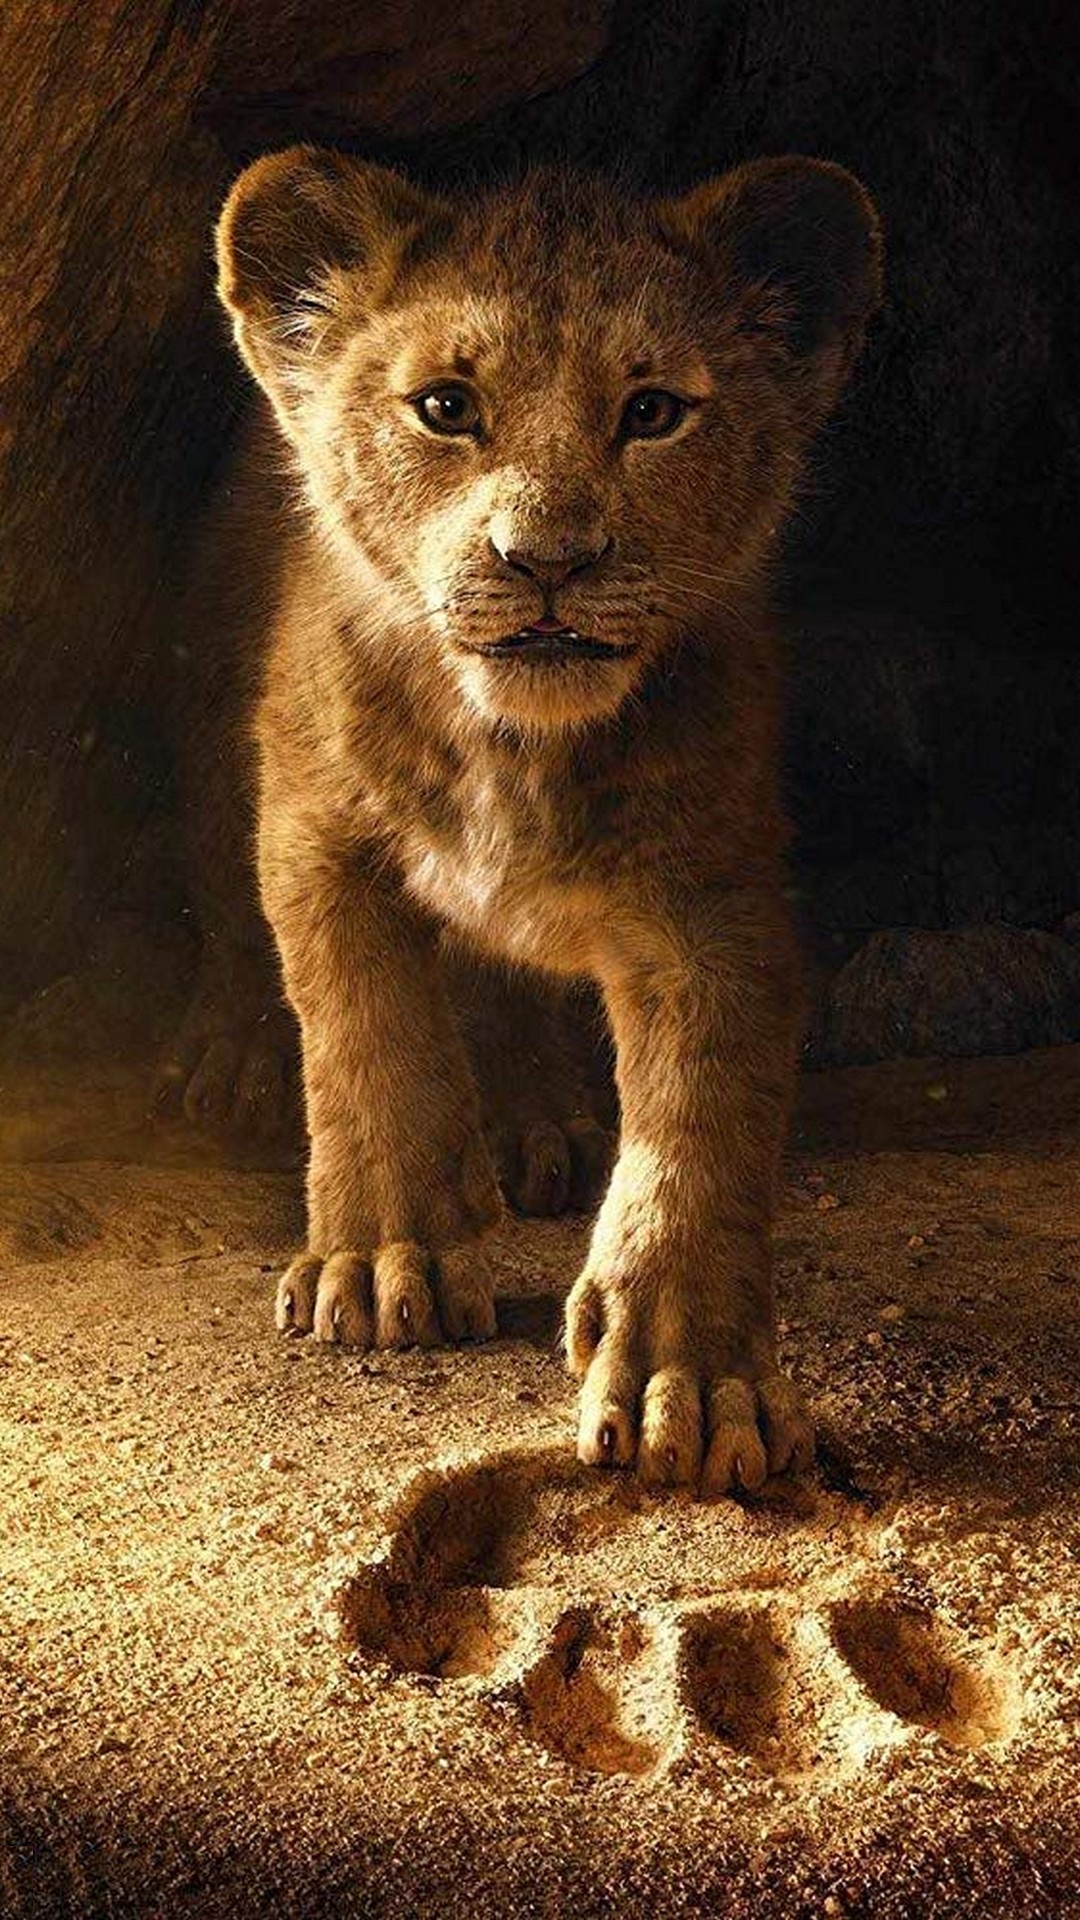 The Lion King Iphone 8 Wallpaper With High-resolution - Lion King - HD Wallpaper 